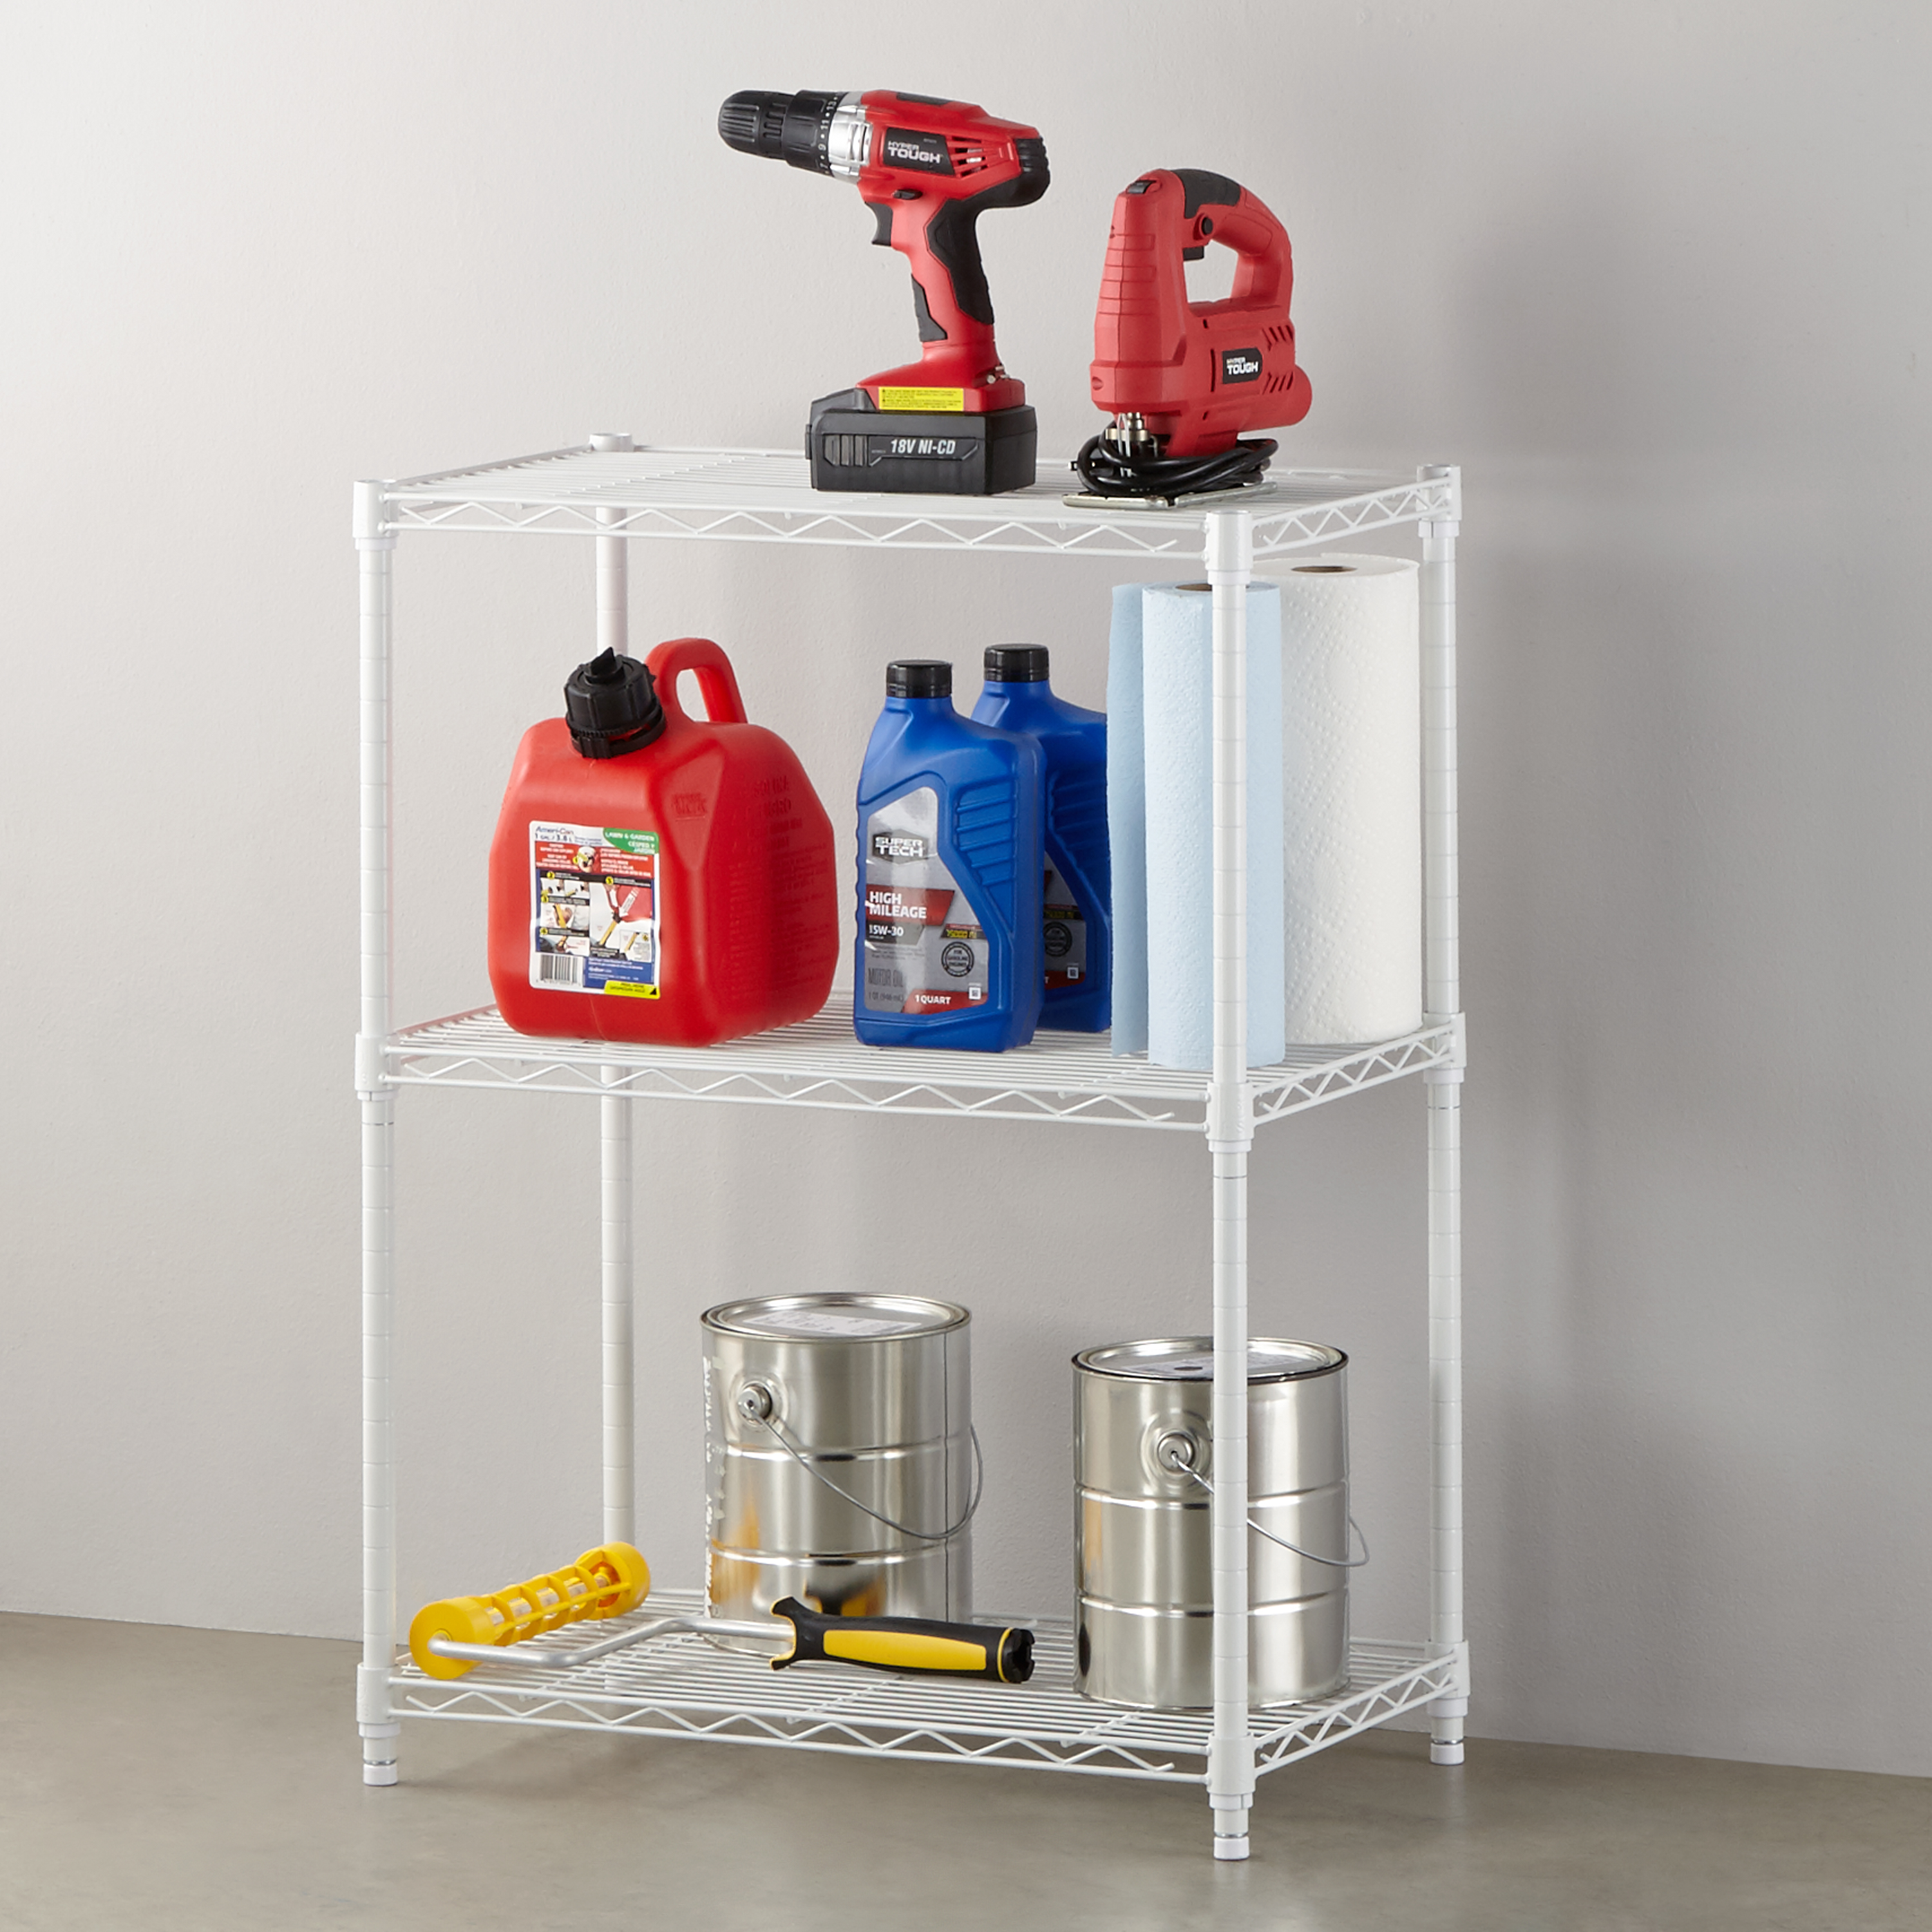 Hyper Tough 3 Tier Wire Shelving Unit,13.4"Dx23.2"Wx30.6"H, White, Weight Capacity 750 lb - image 3 of 4